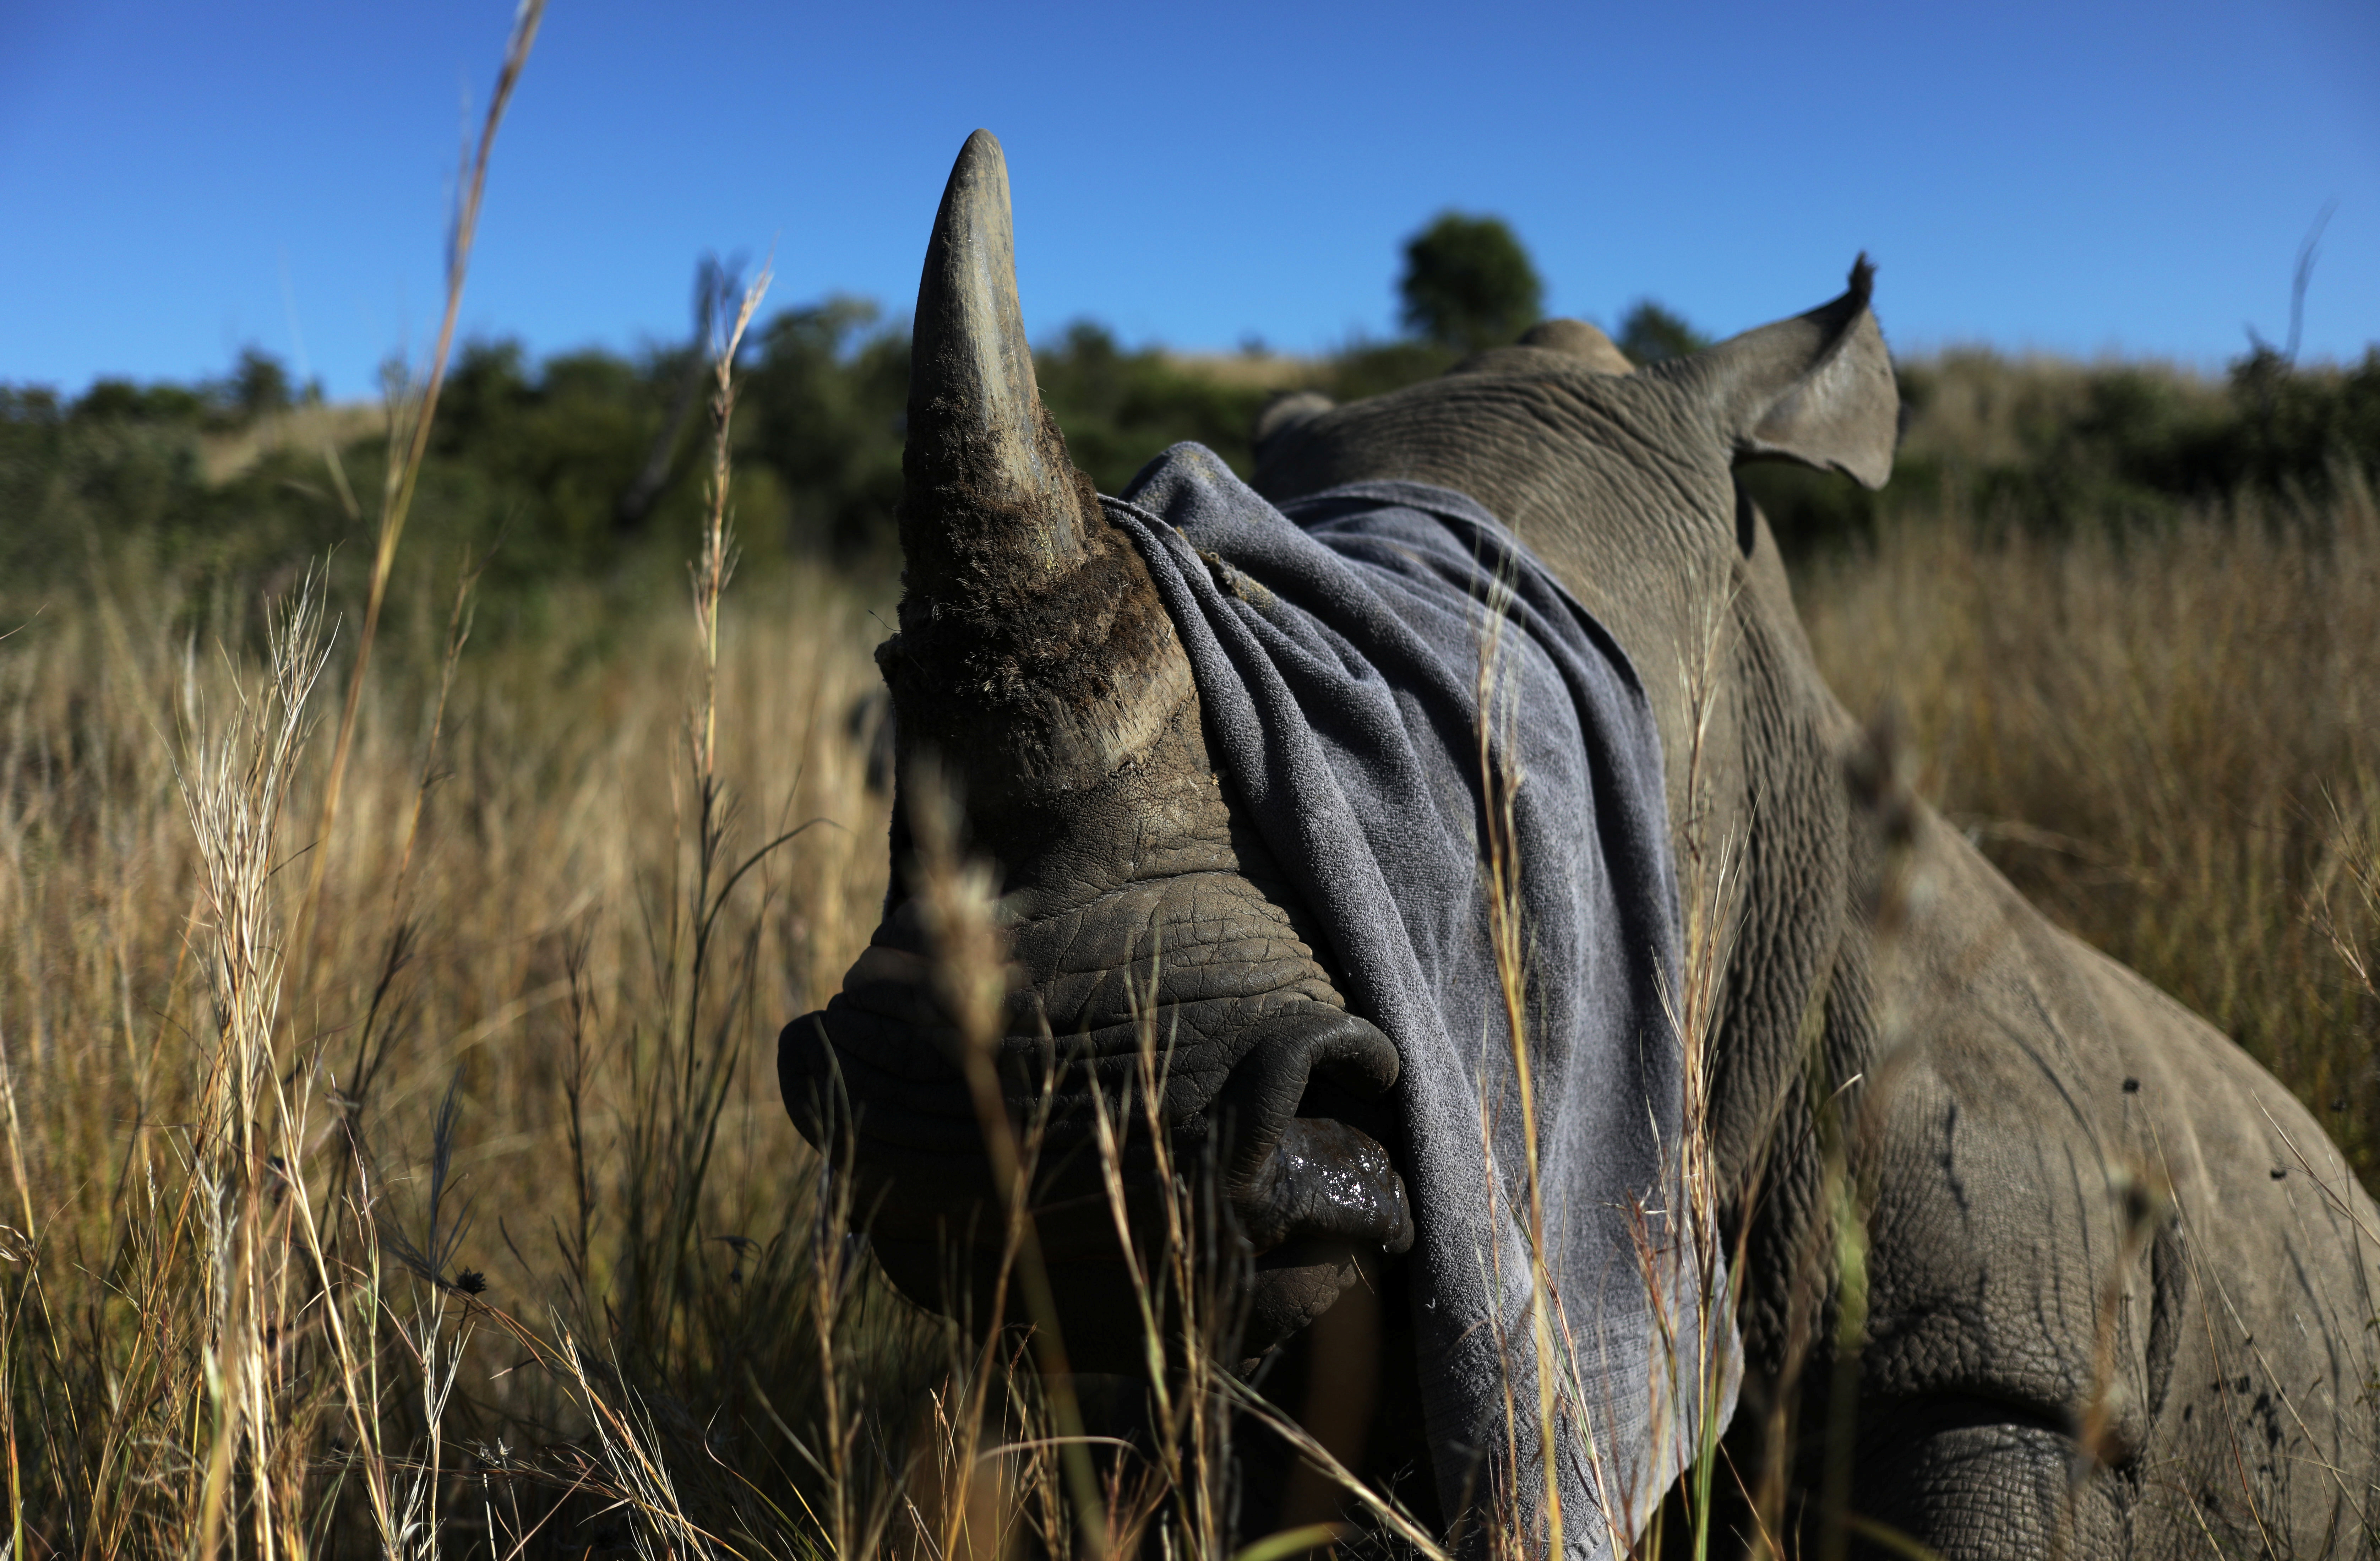 A towel is used to cover the eyes of a tranquillised rhino before it is dehorned in an effort to deter poaching, amid the spread of the coronavirus disease (COVID-19), at the Pilanesberg Game Reserve in North West Province, South Africa, May 12, 2020. Picture taken May 12, 2020. Photo: Reuters